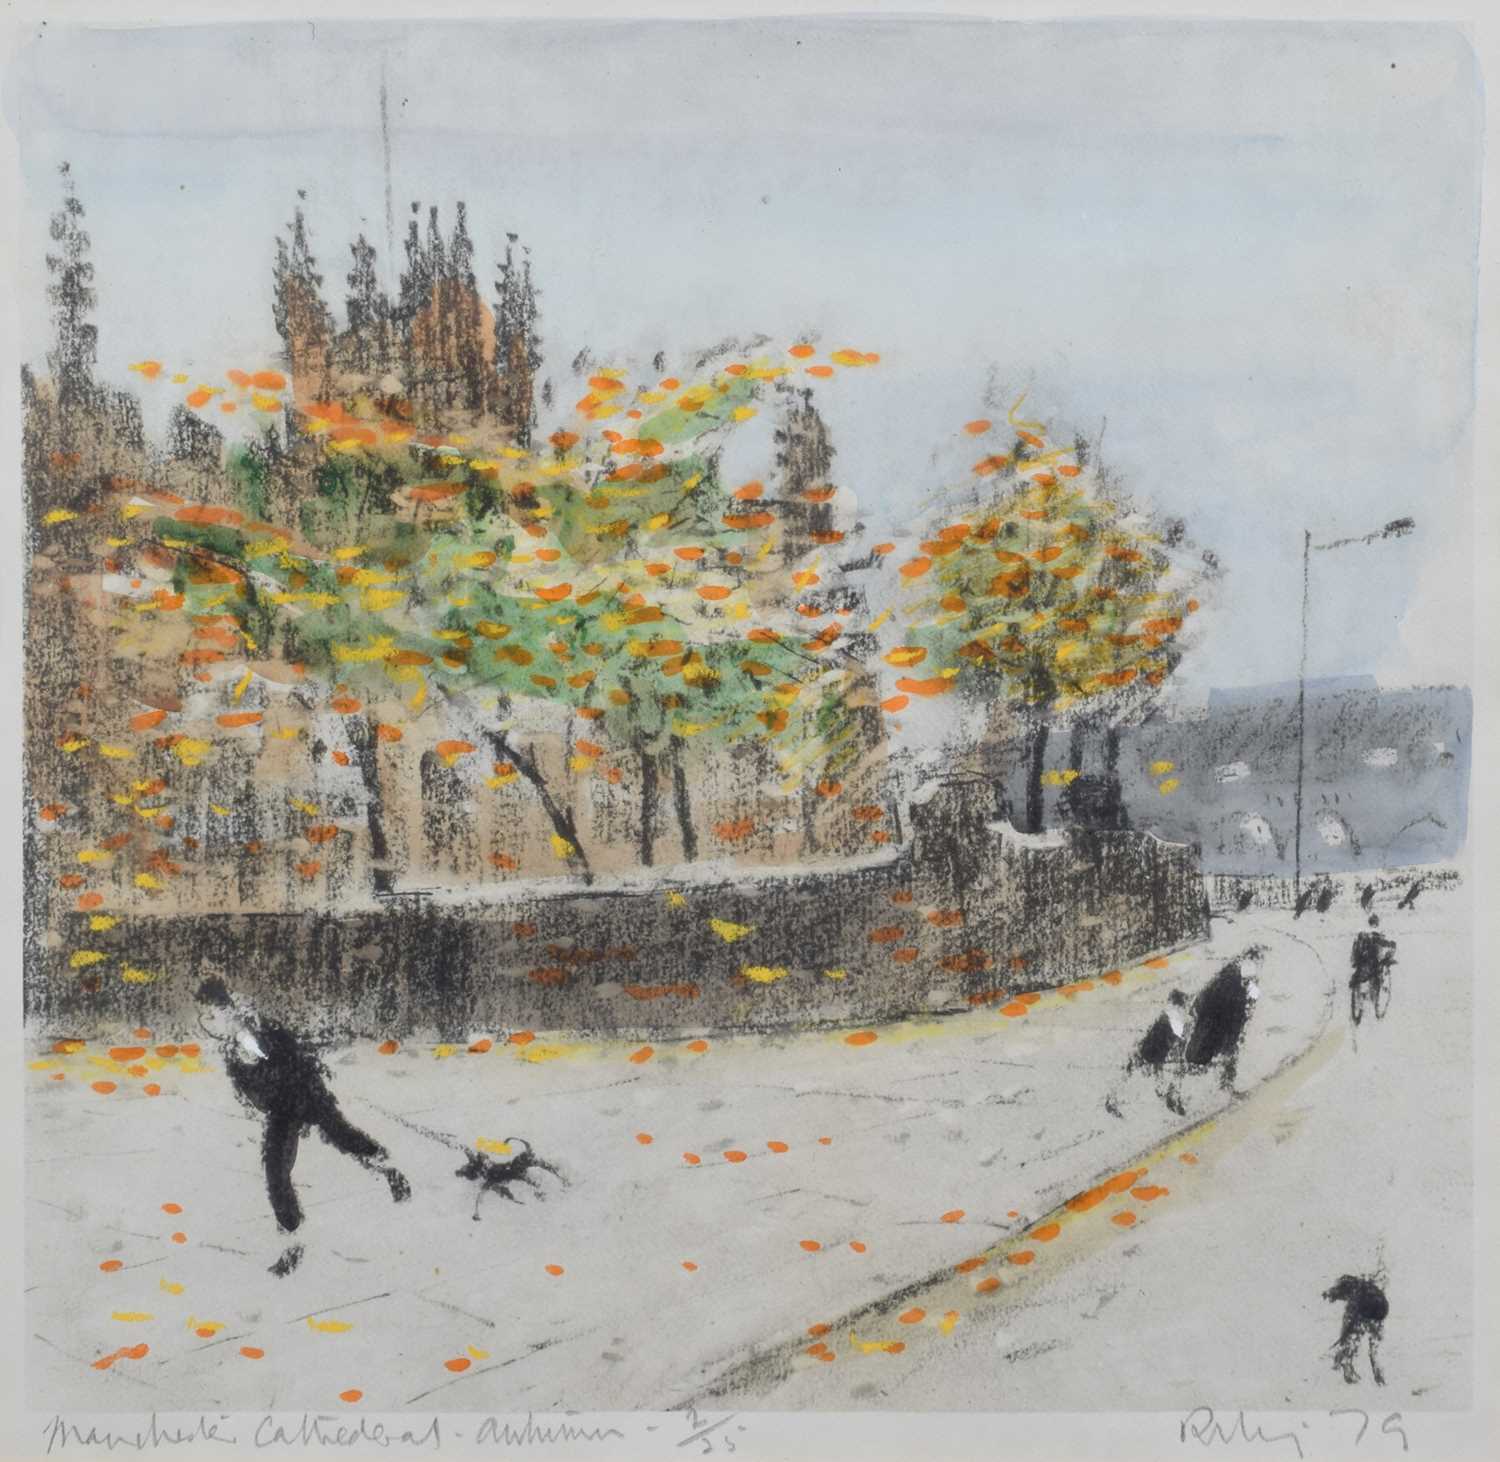 Lot 110 - Harold Riley, "Manchester Cathedral - Autumn", signed print.